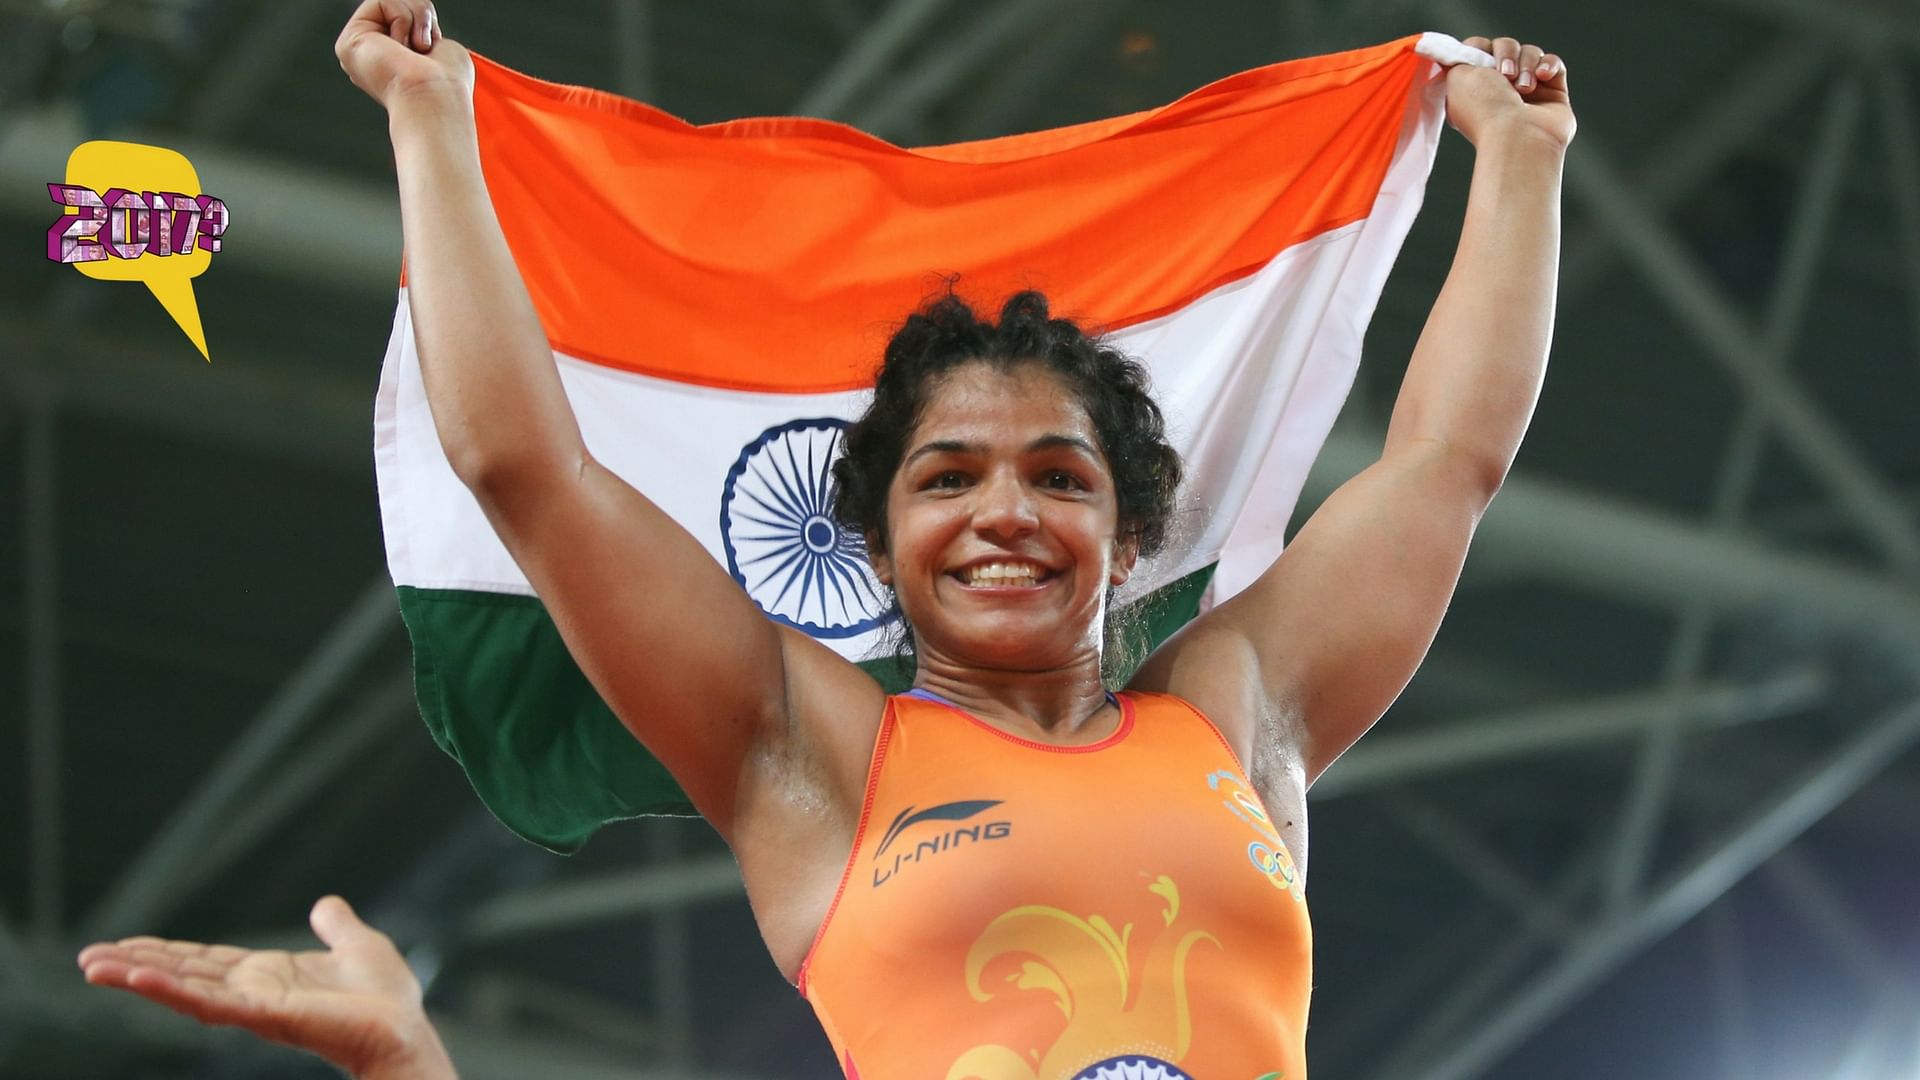 Sakshi Malik won a bronze medal at the Rio Olympics this year. (Photo: Reuters/Altered by <b>The Quint</b>)